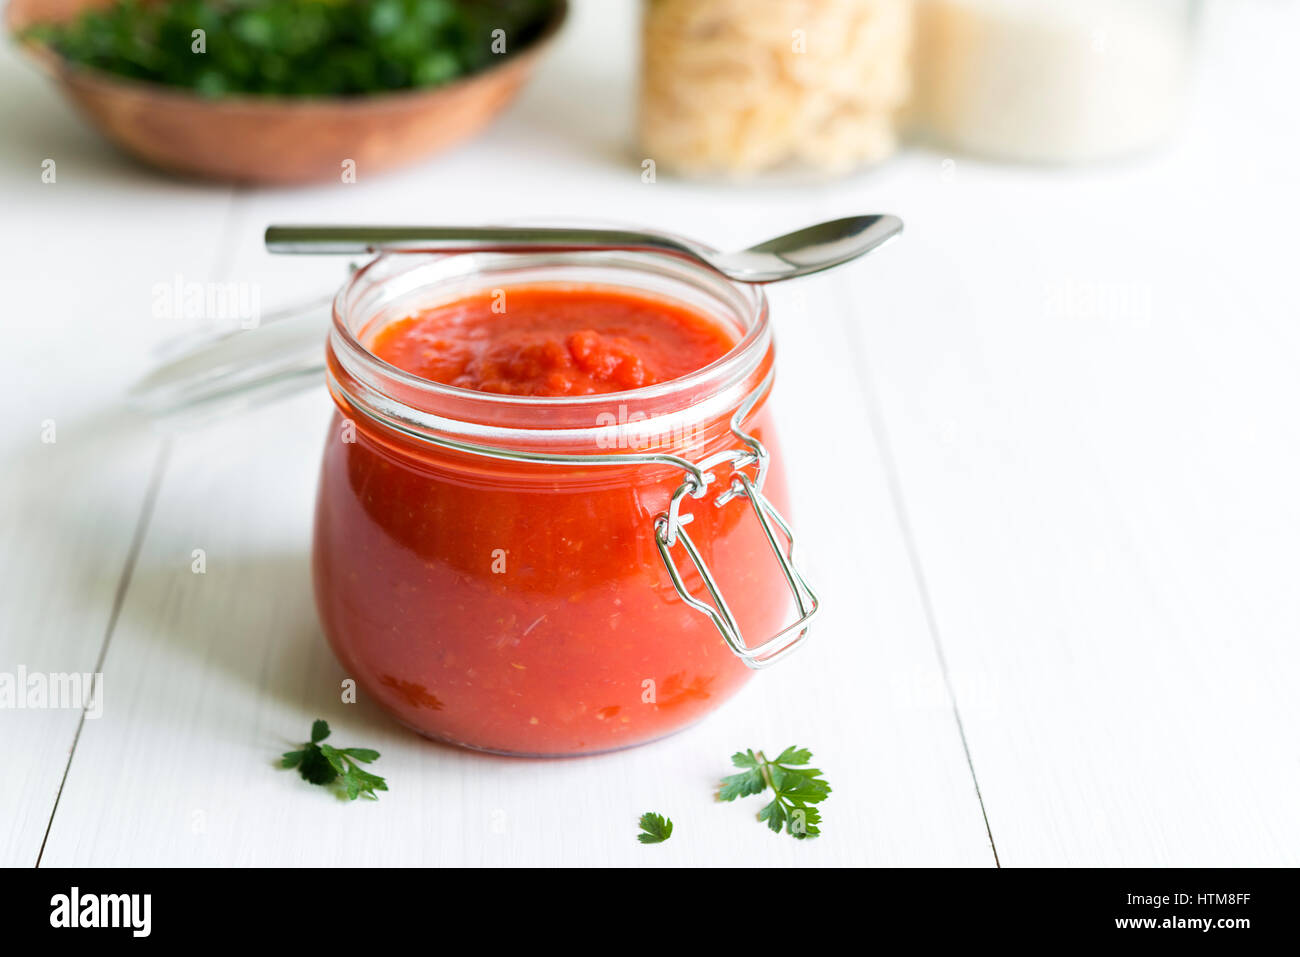 Jar of fresh homemade tomato sauce with parsley arranged on white wooden table. Stock Photo